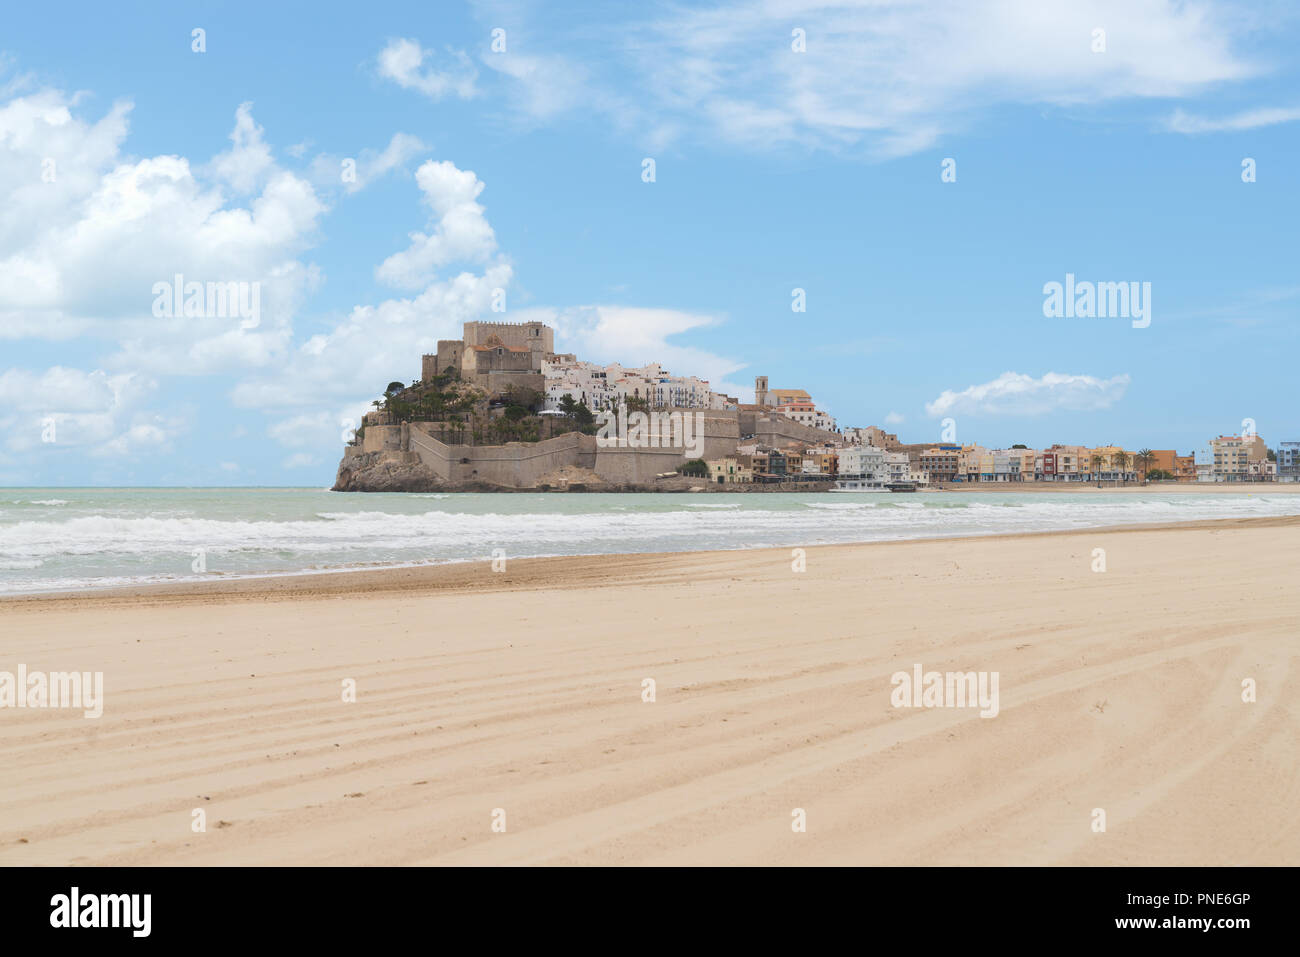 Pope Luna's Castle. Valencia, Spain. Peniscola. Castell. The medieval castle of the Knights Templar on the beach. Beautiful view of the sea and the ba Stock Photo